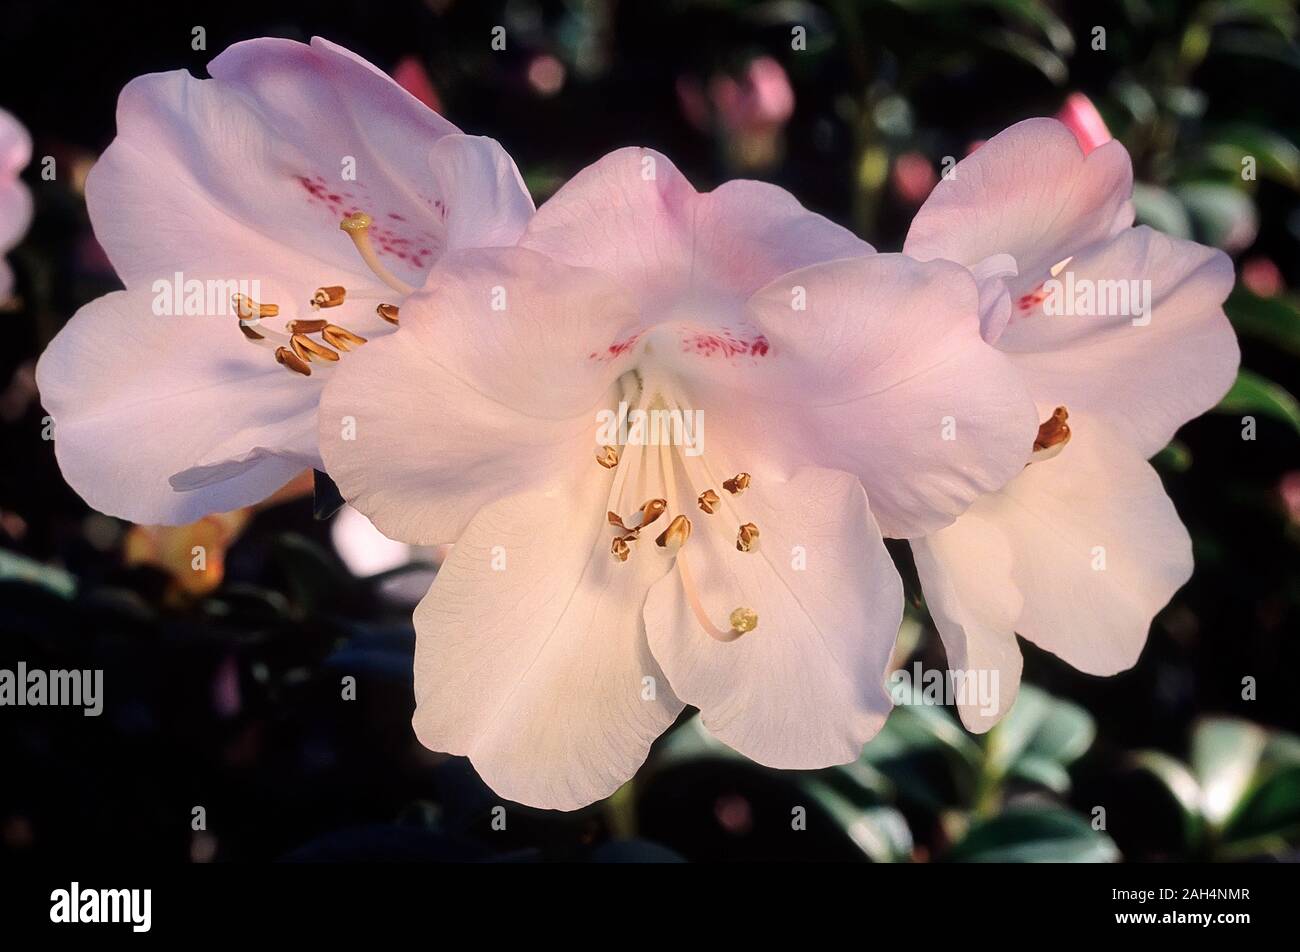 Rhododendron cv. Cilpinense, Ericaceae, evergreen shurbs, dwarf hybrid, flowers funnel-shaped, pale pink. Stock Photo